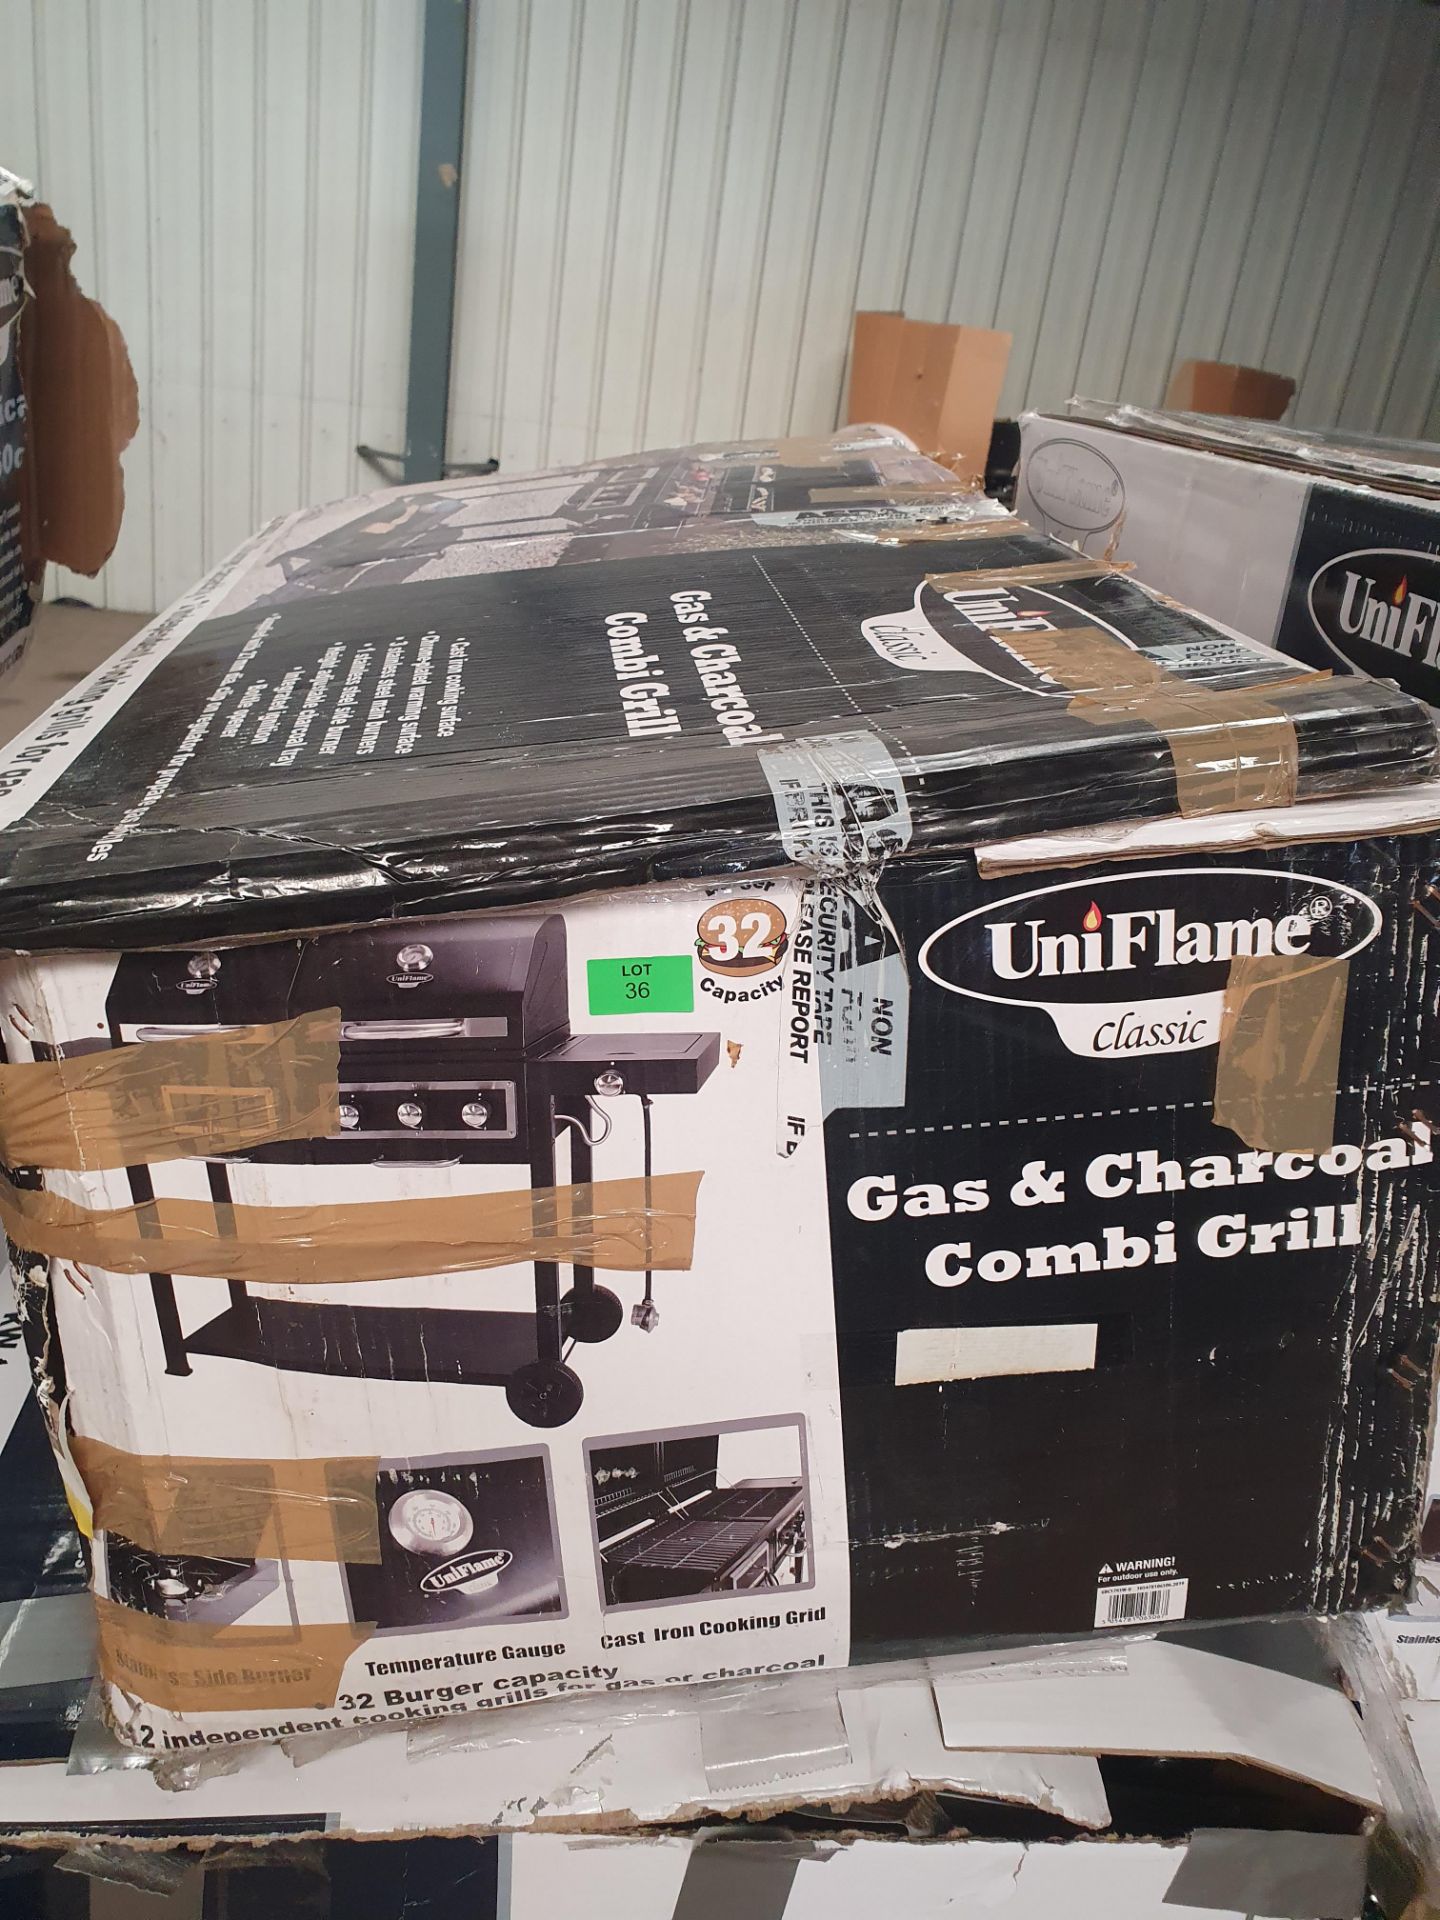 Uniflame Gas & Charcoal Combi Grill BBQ - Image 2 of 2